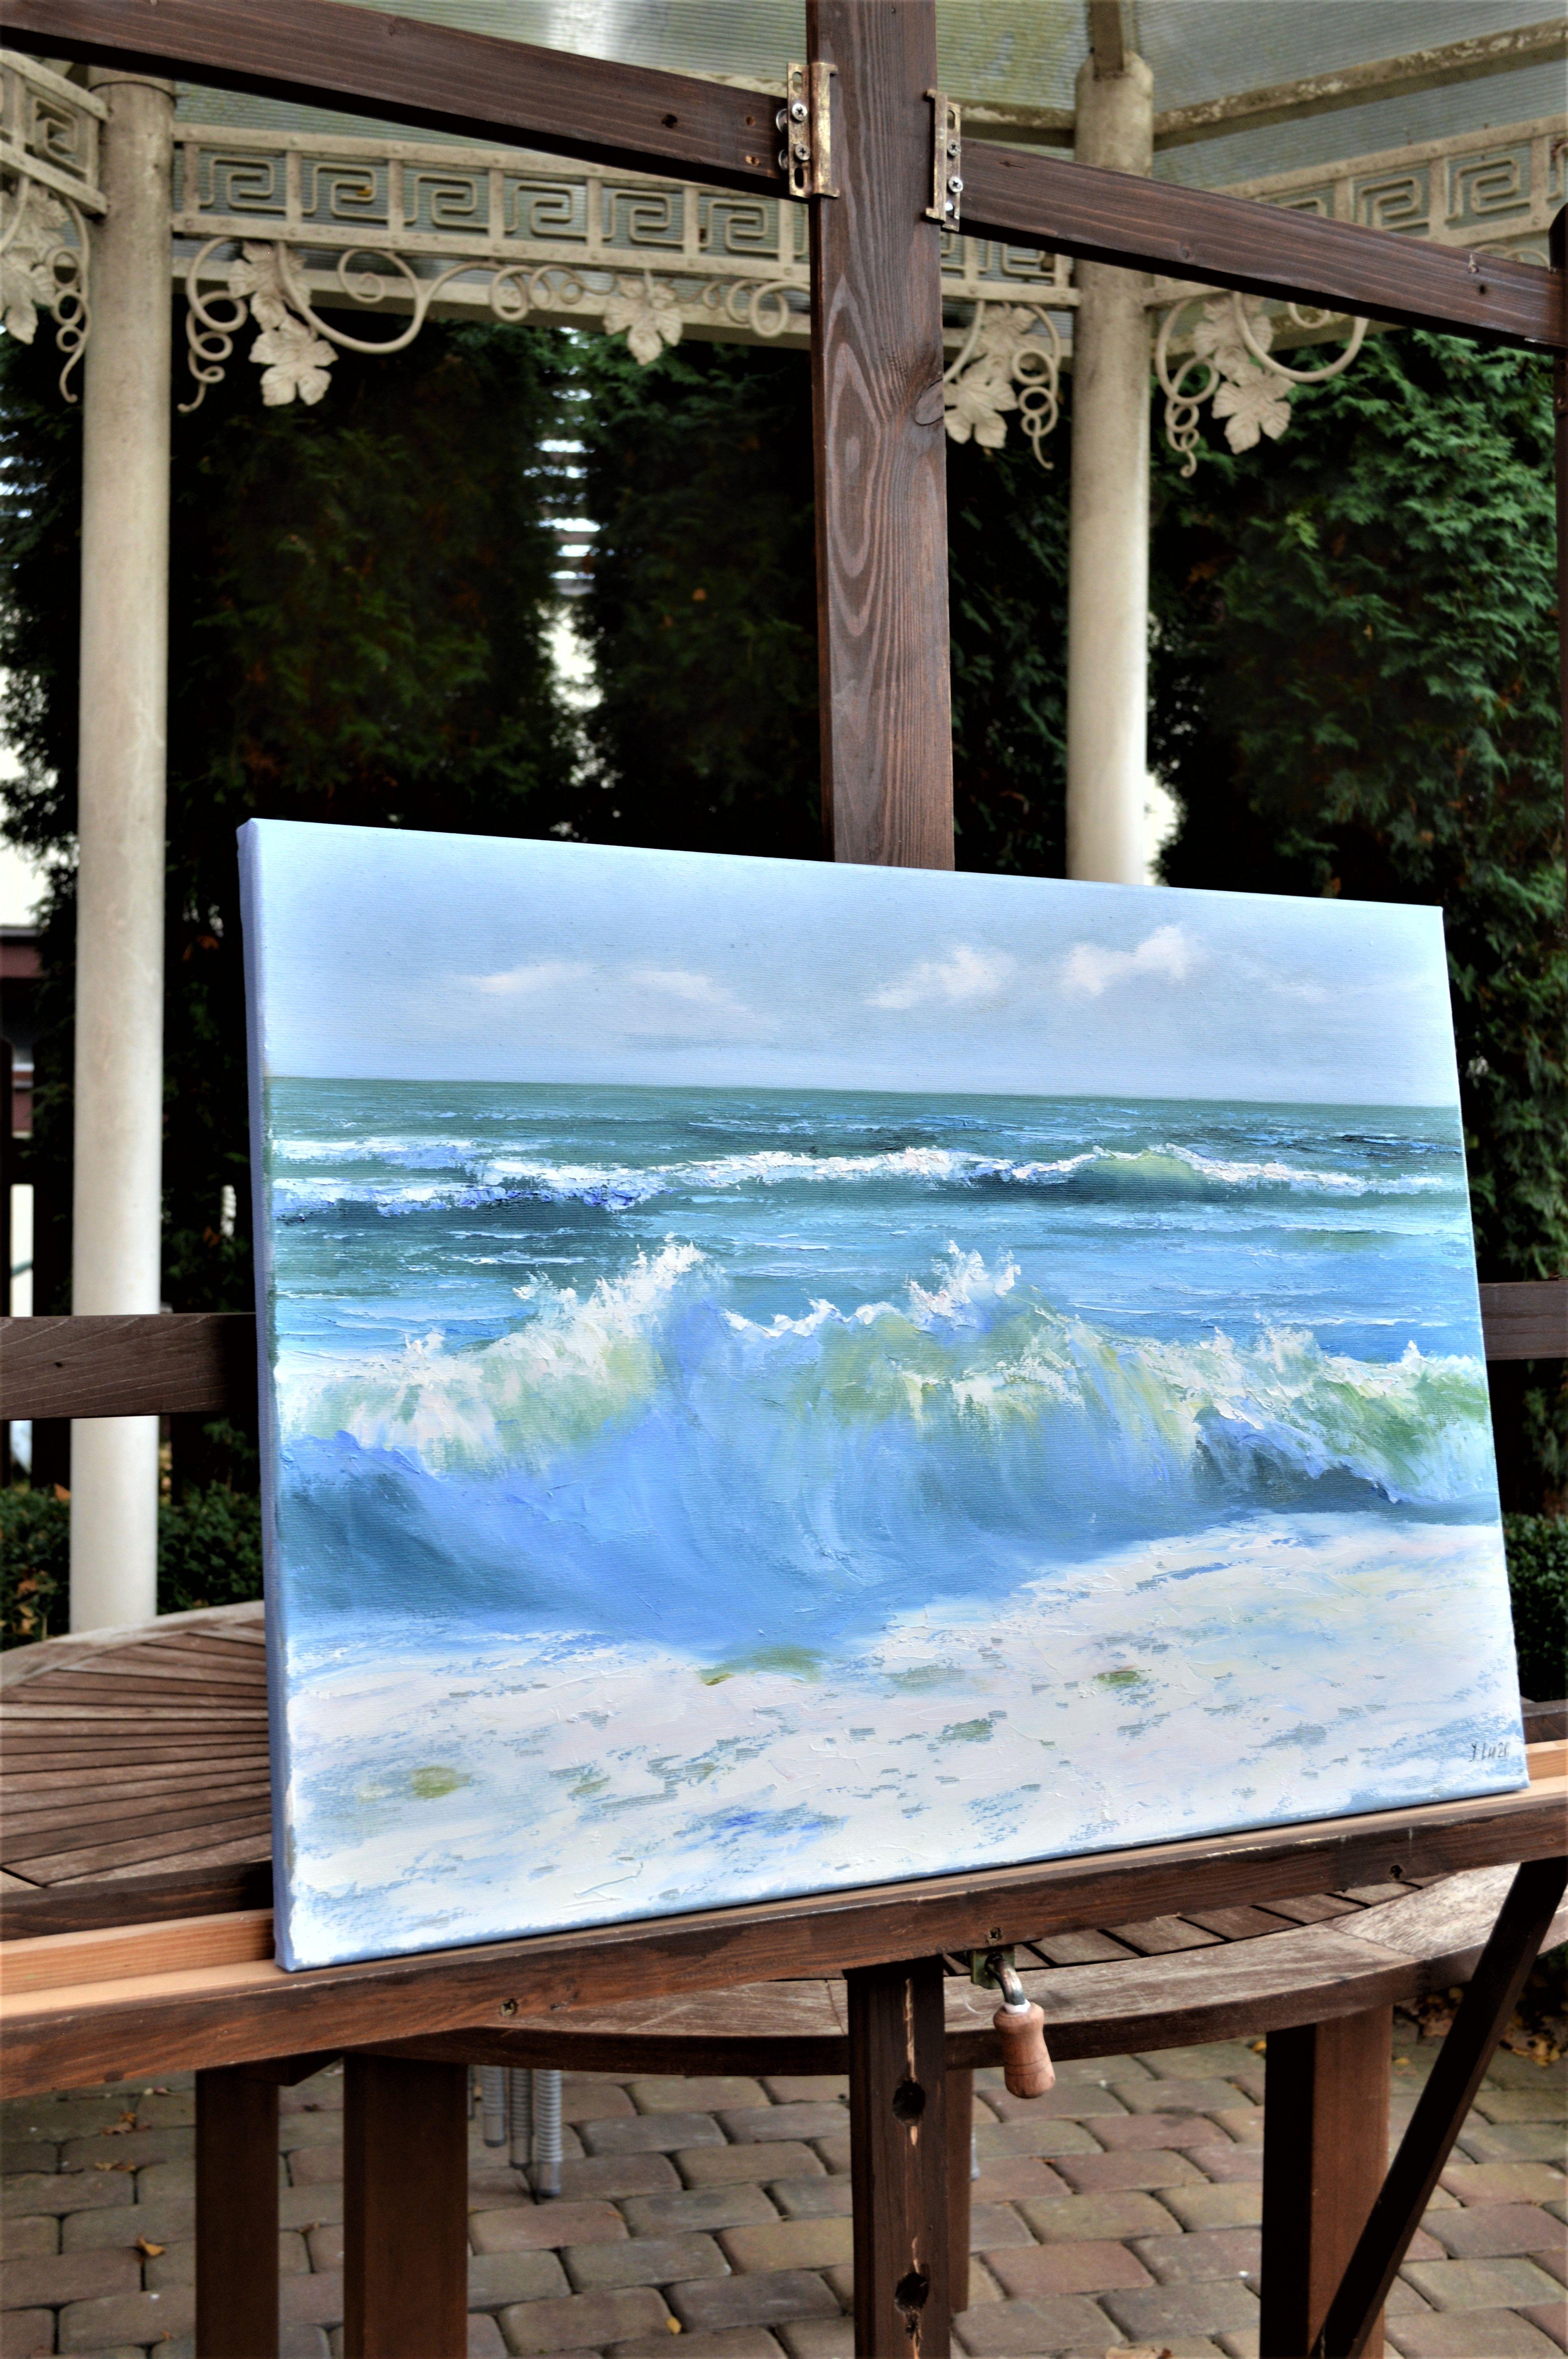 In crafting this oil painting, I've poured my soul into the tumultuous beauty of the sea. Using expressionist strokes and a realist's eye, I've captured the raw dance of the waves—a symphony of power and grace. It's a piece that speaks to the